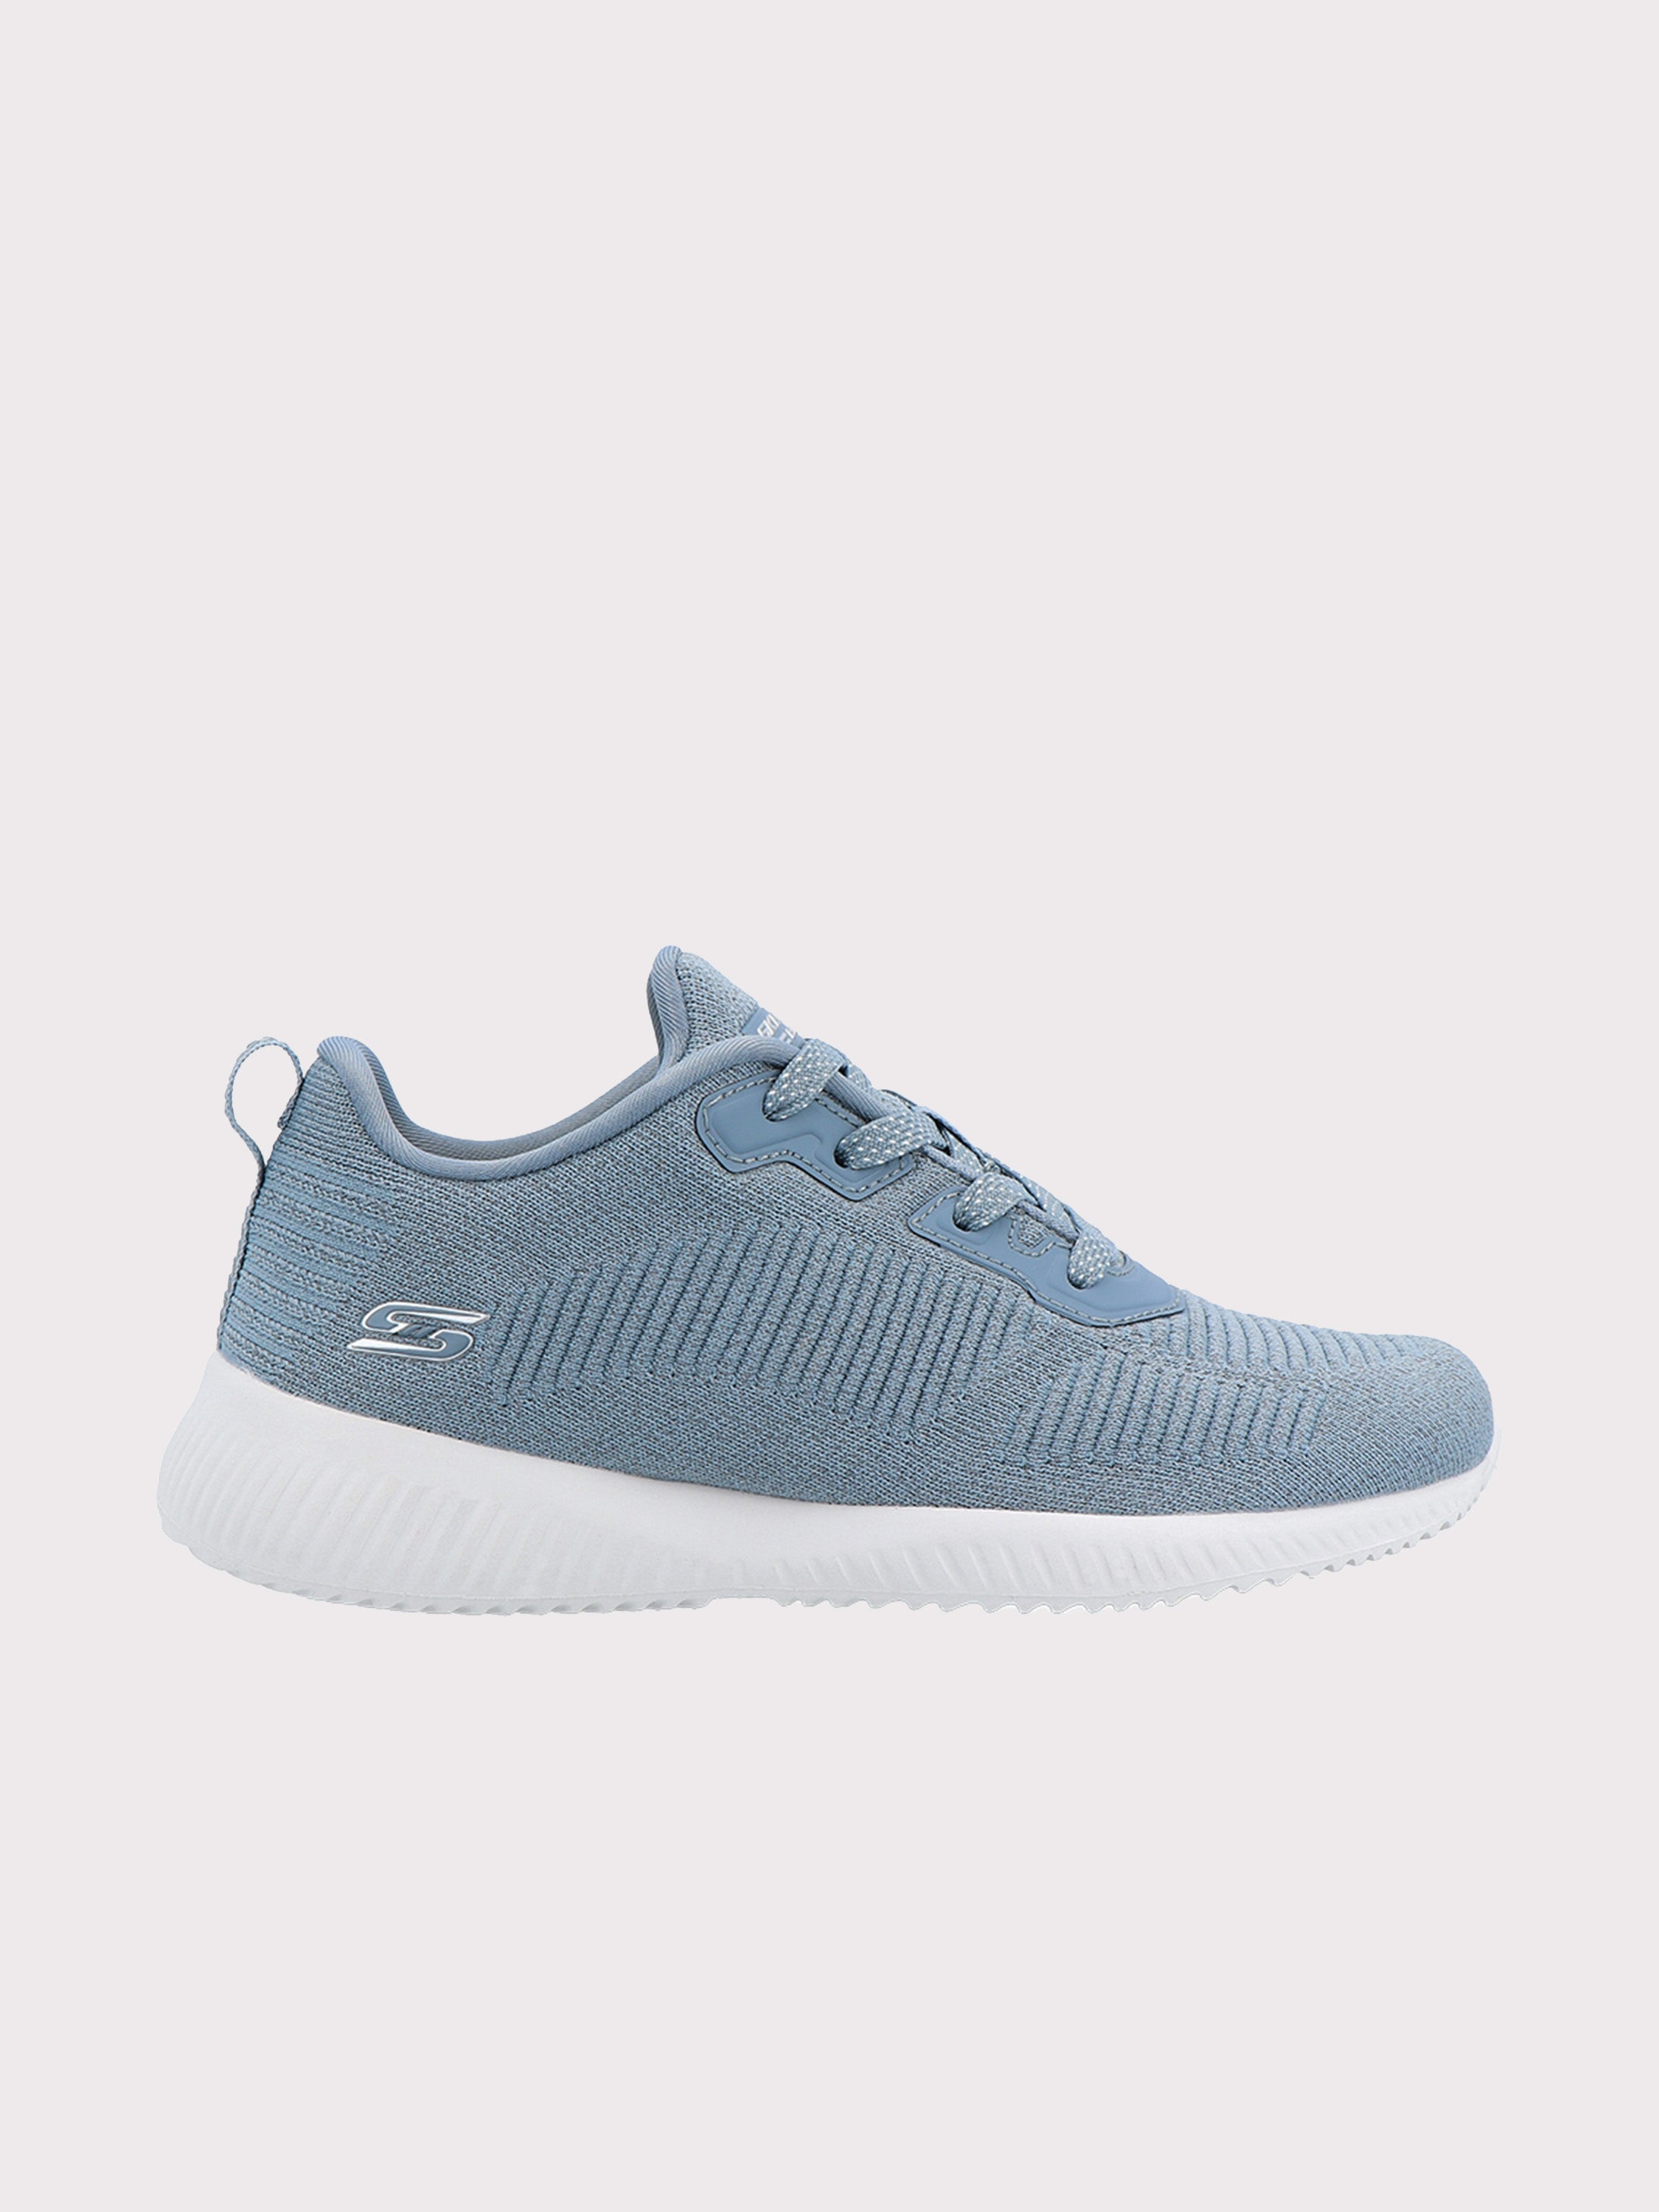 Skechers Women's BOBS Sport Squad - Ghost Star Trainers #color_Blue